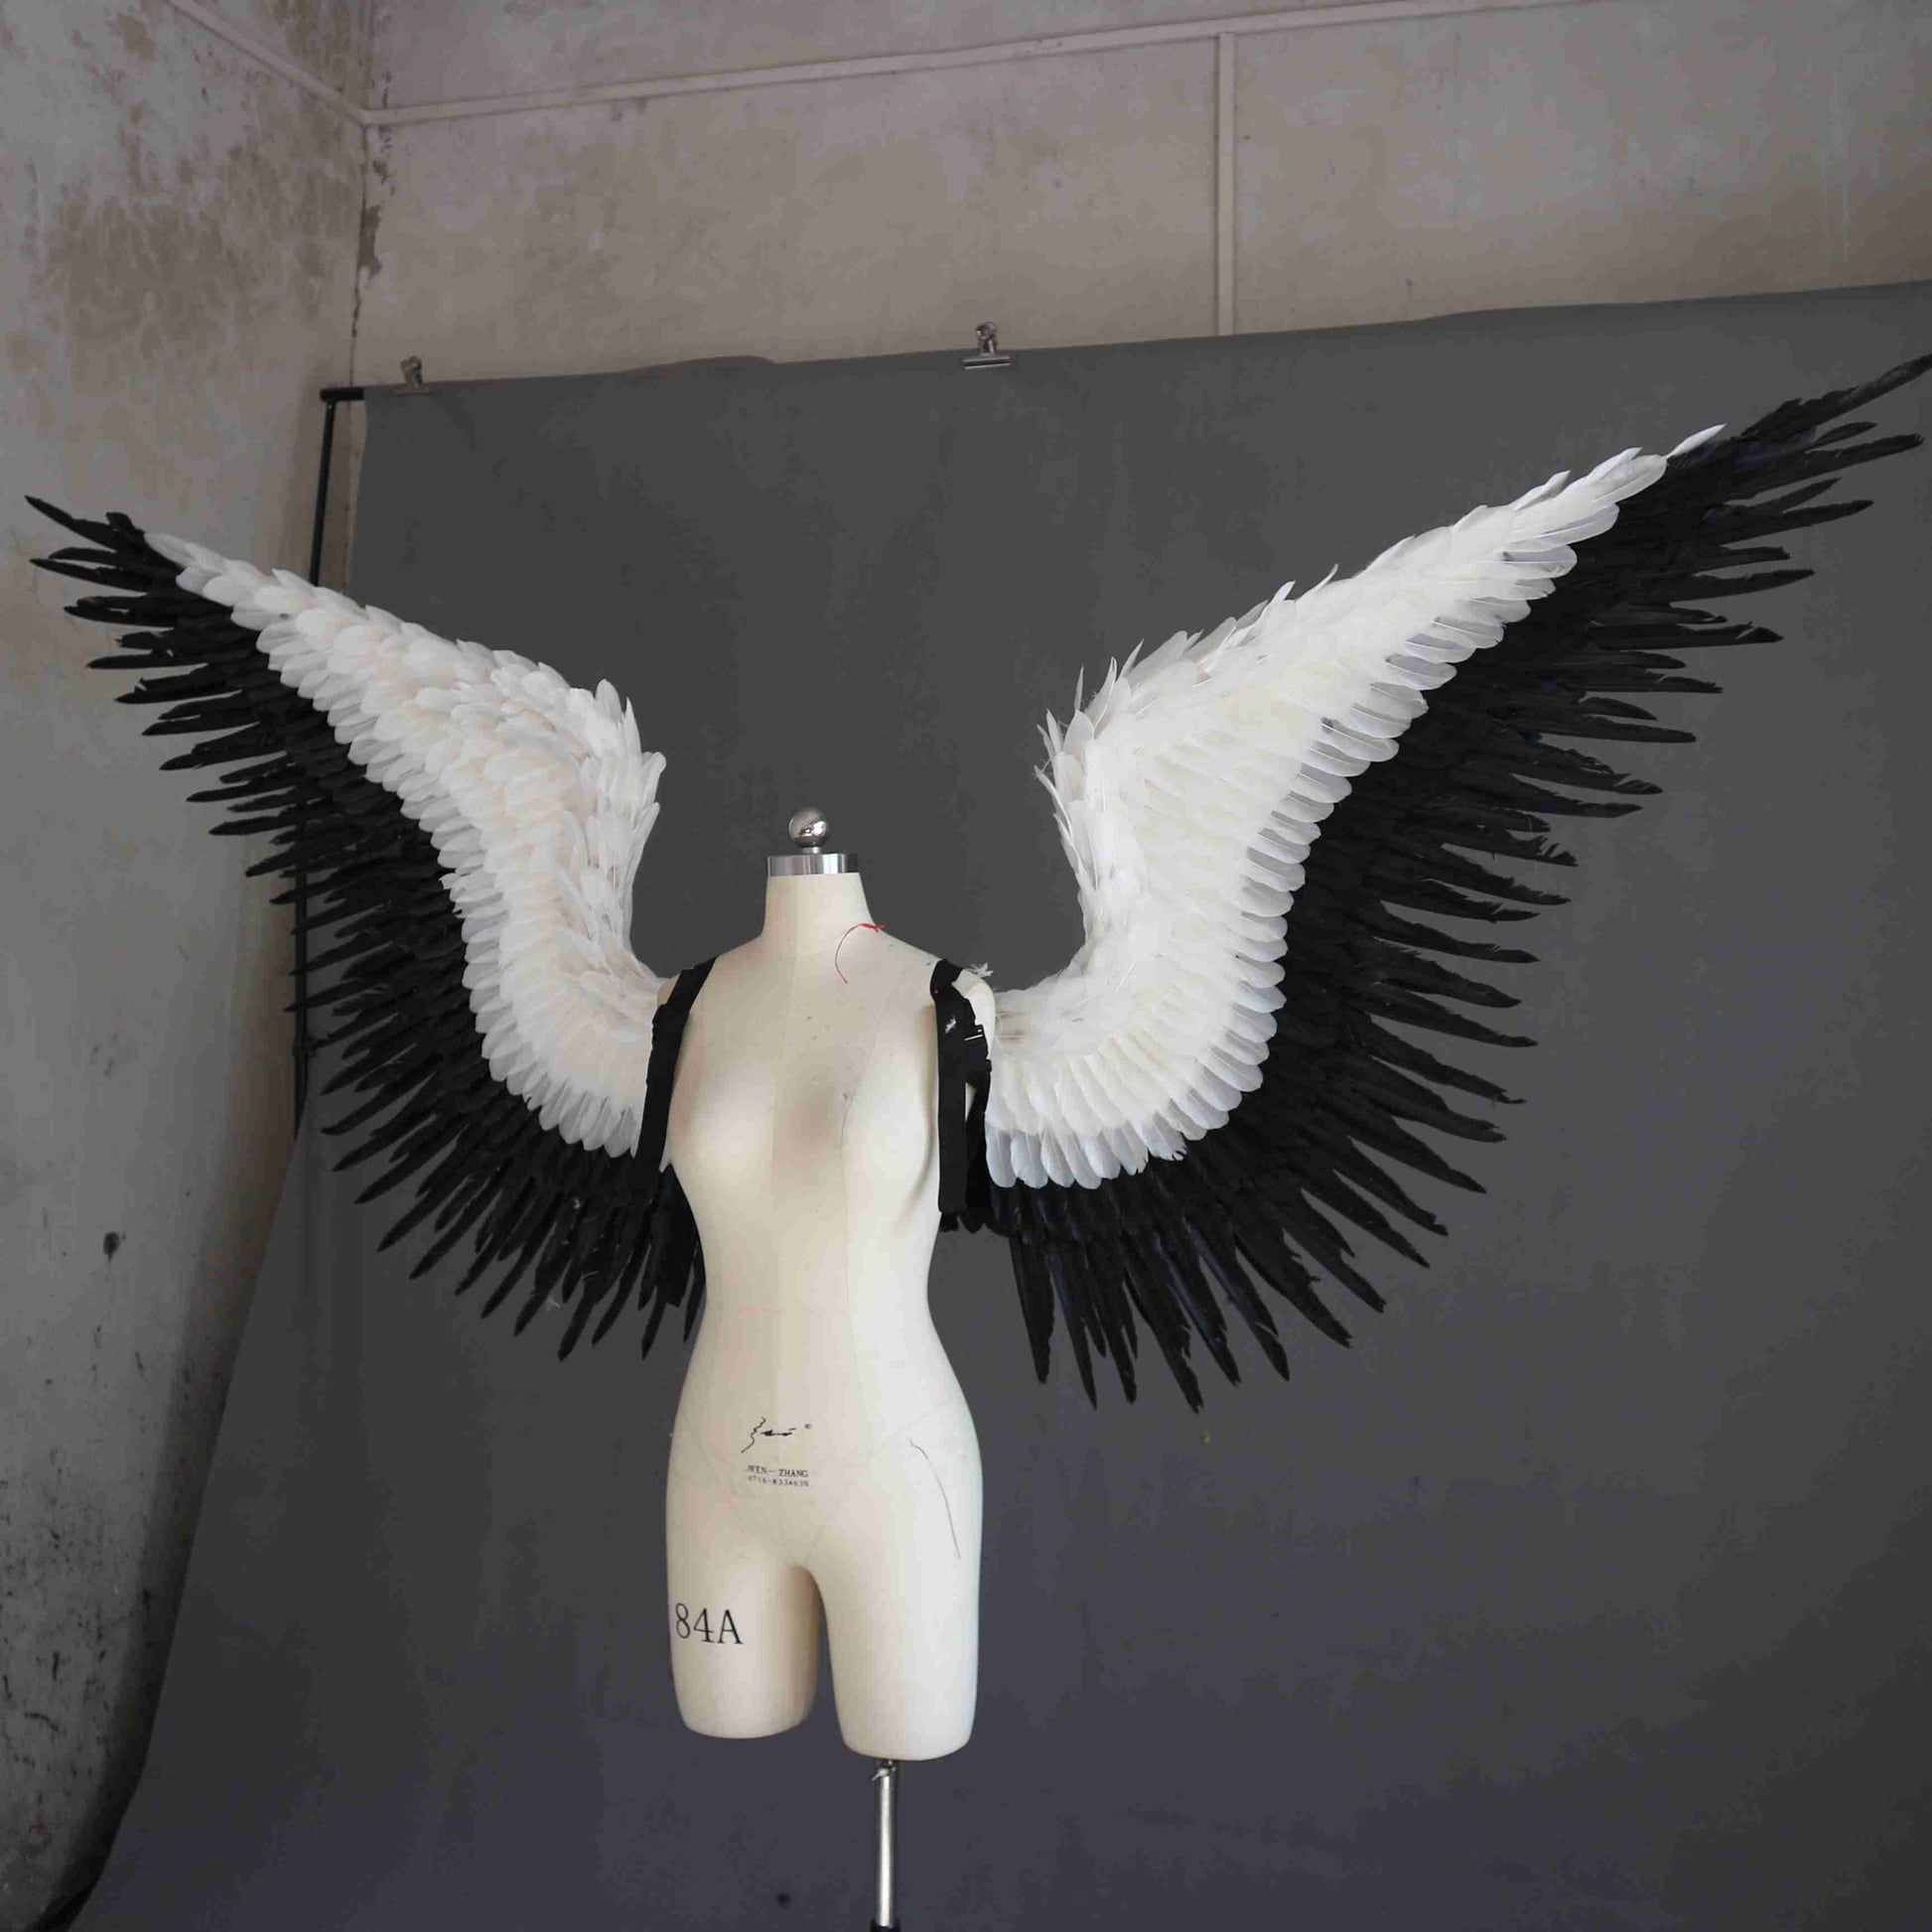 Our black white angel wings from the left. Made from goose feathers. Wings for angel wings costume or devil wings costume. Suitable for photoshoots.